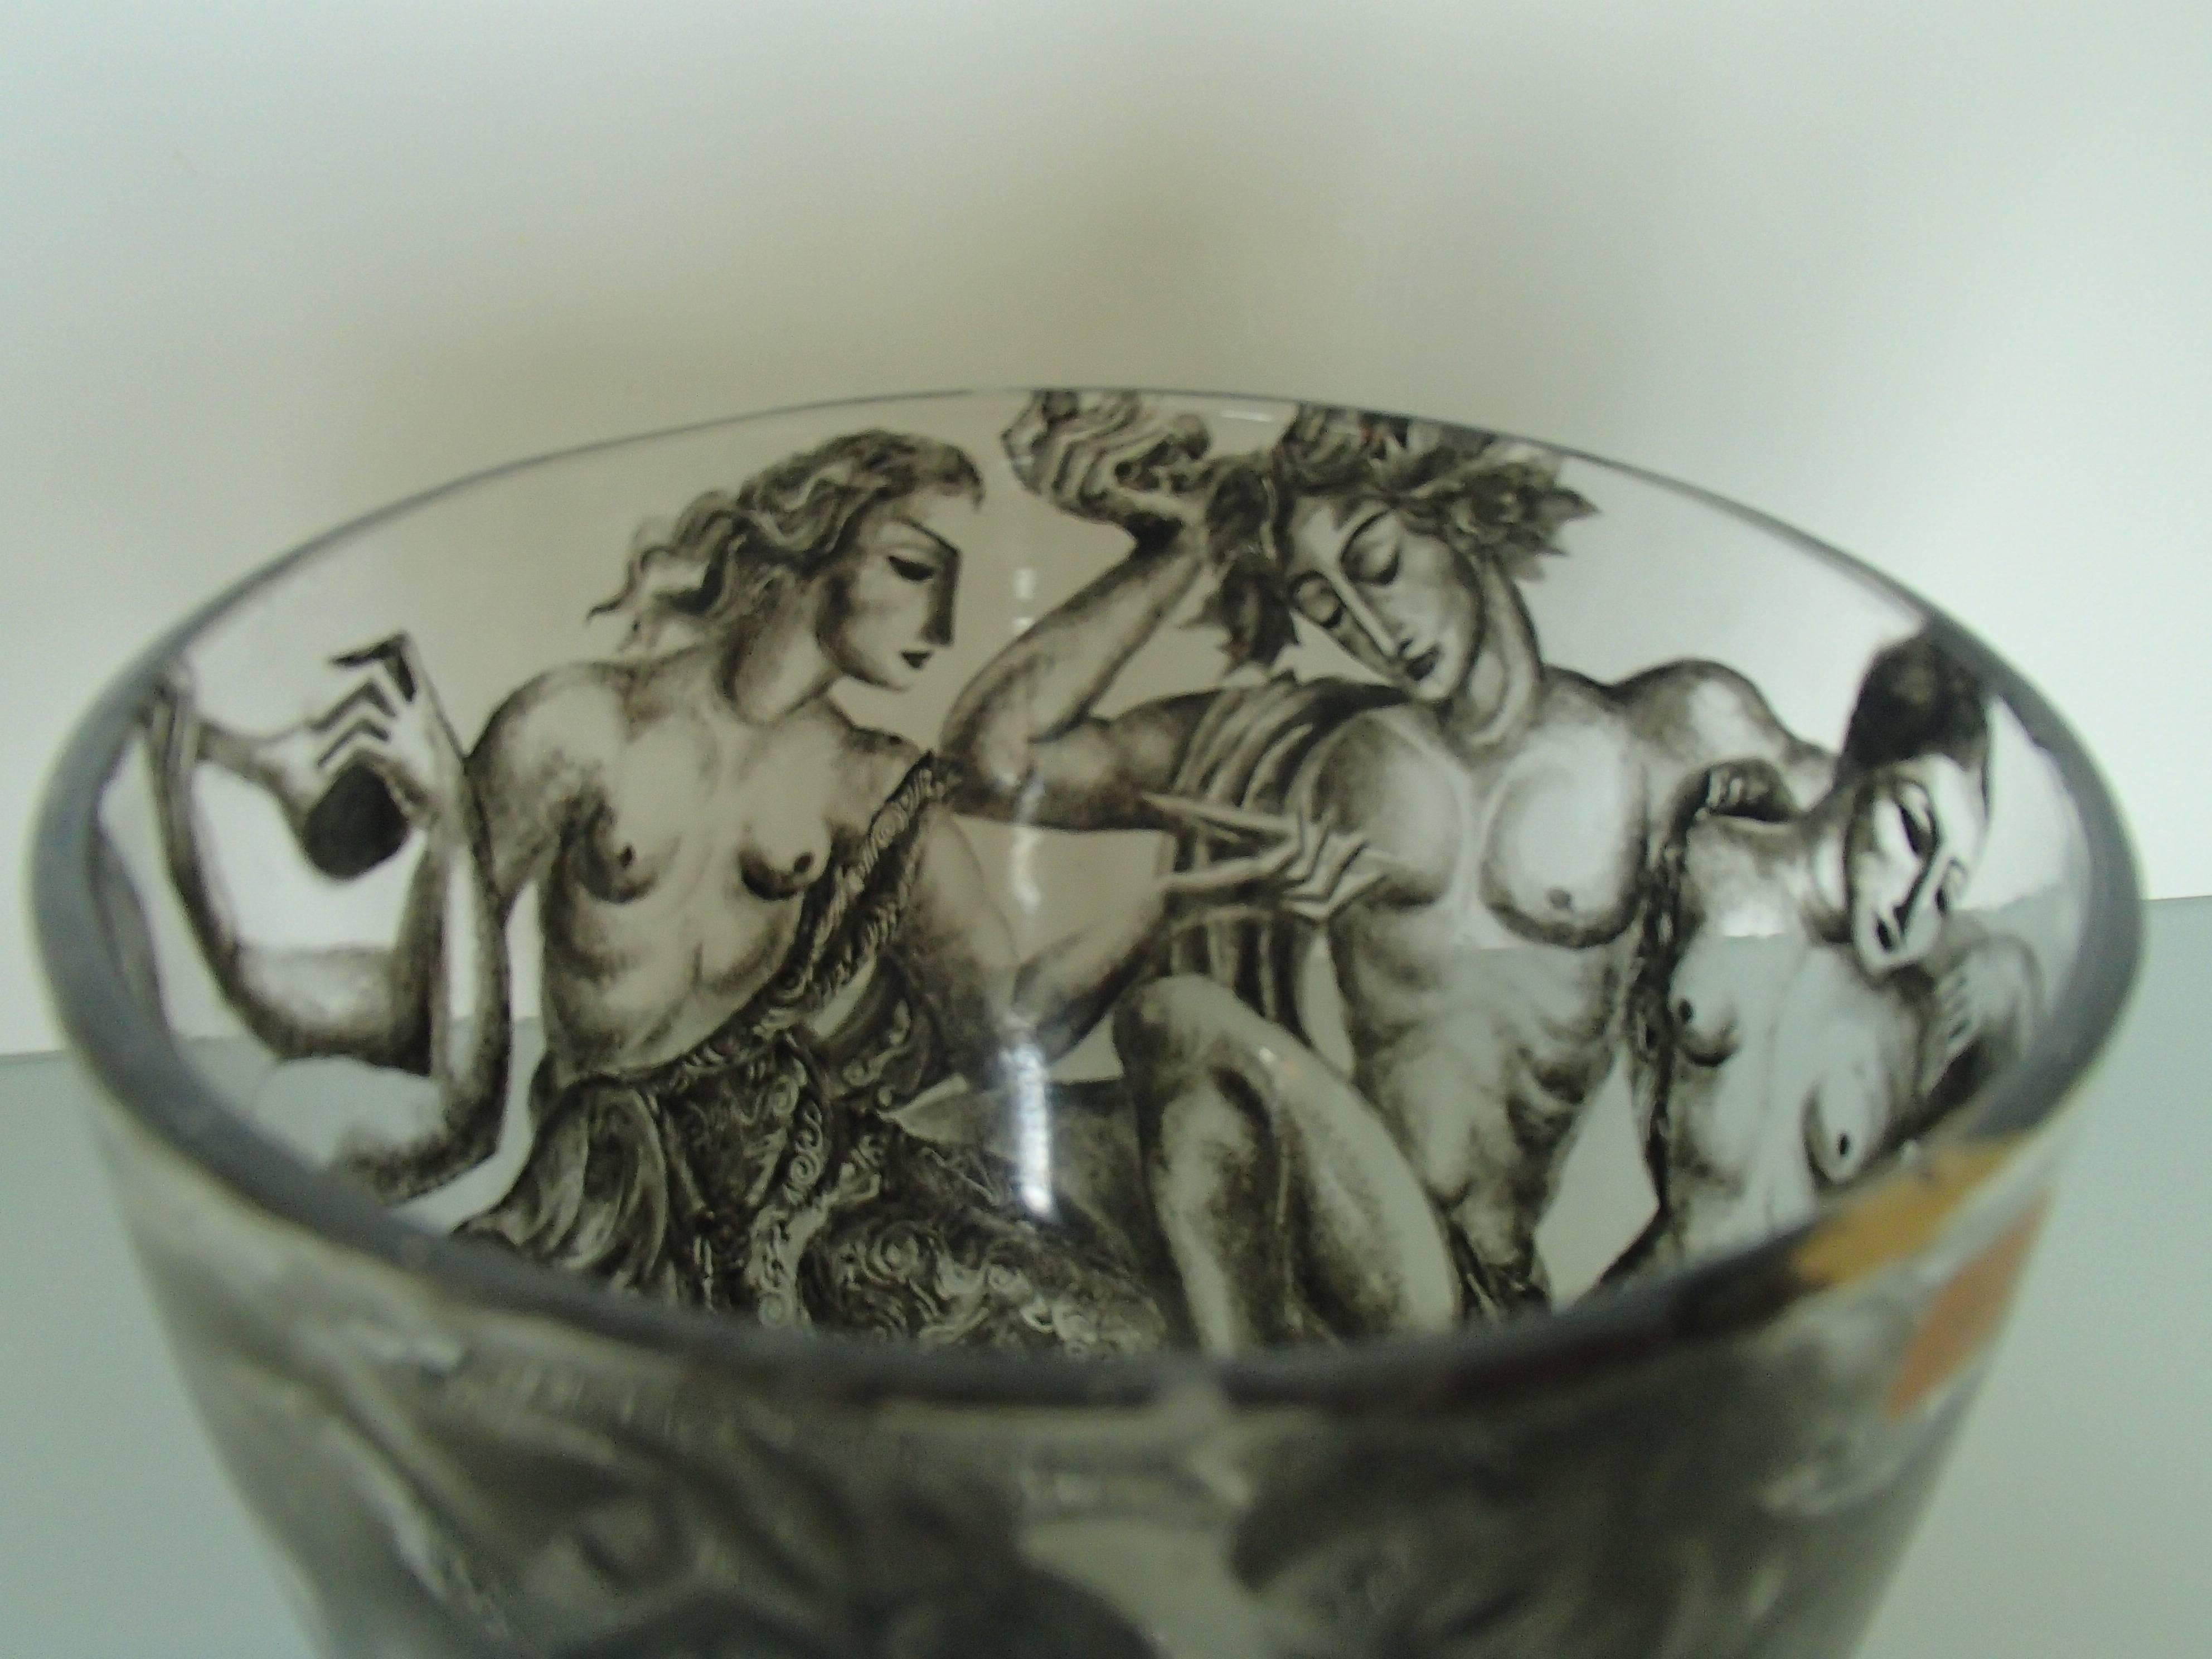 Early 20th Century Bauhaus bowl with black cubistic greac romain figures 